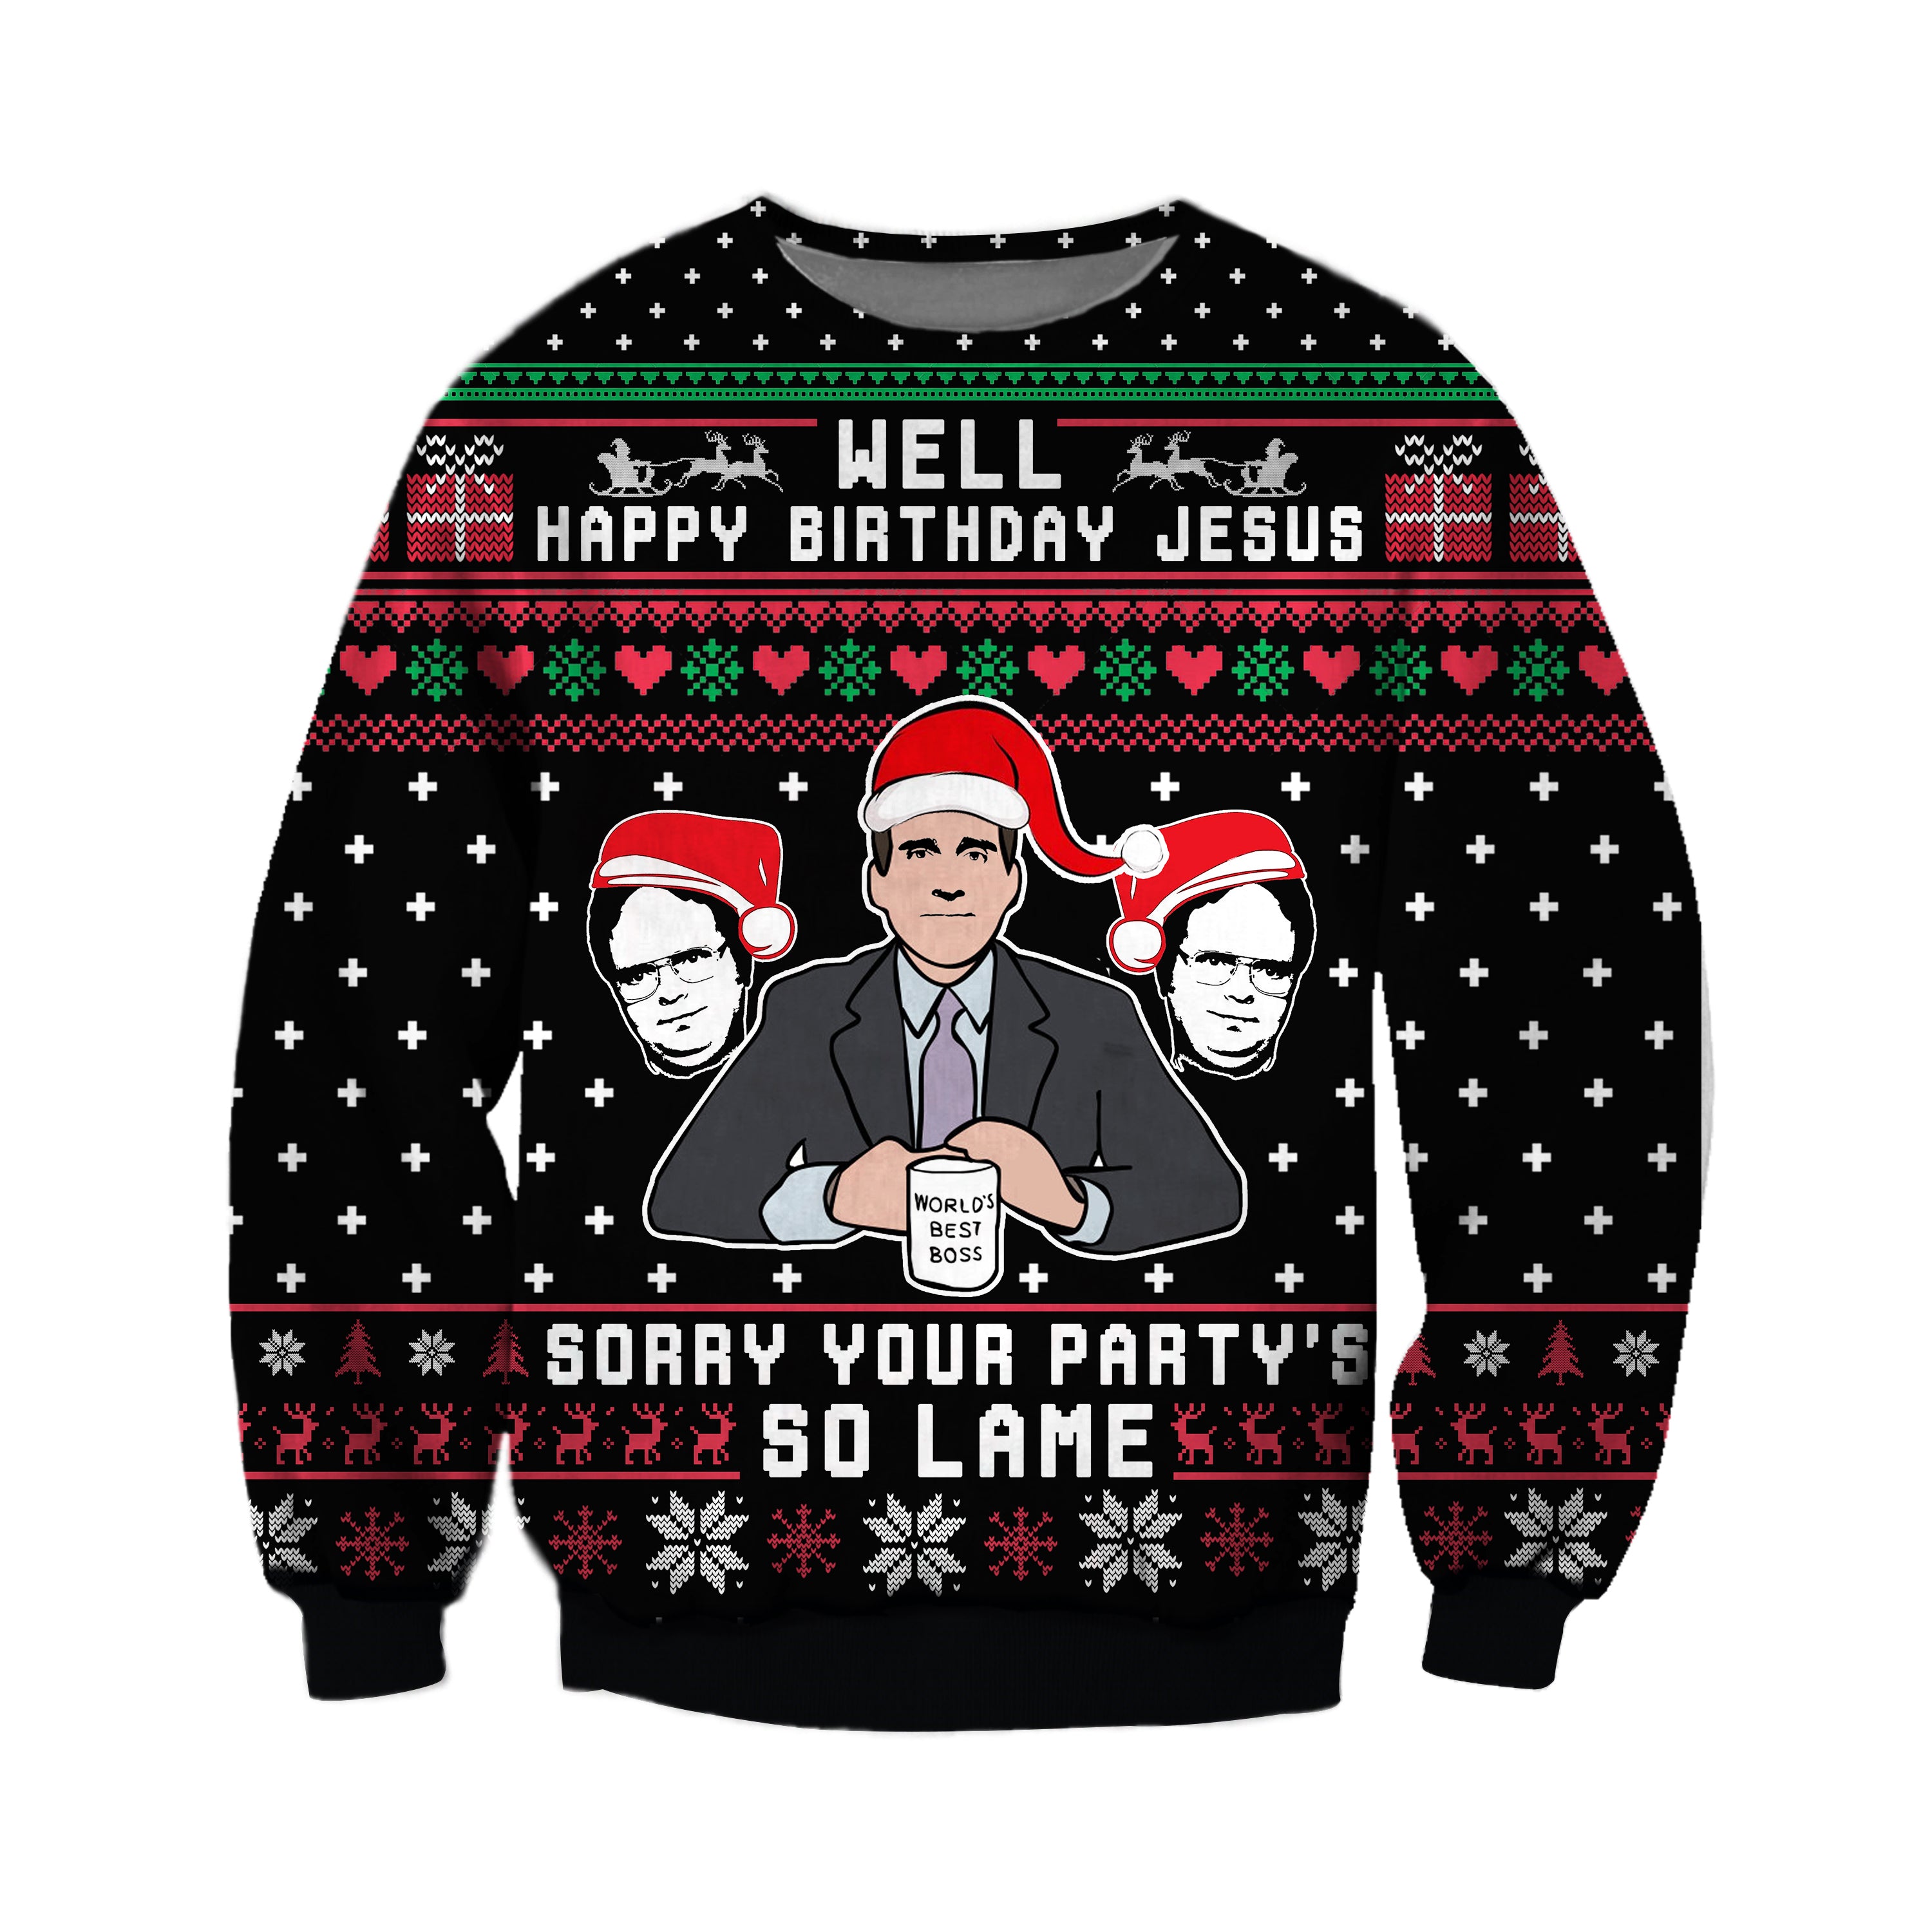 Your Party’S So Lame 3D All Over Printed Ugly Christmas Sweatshirt